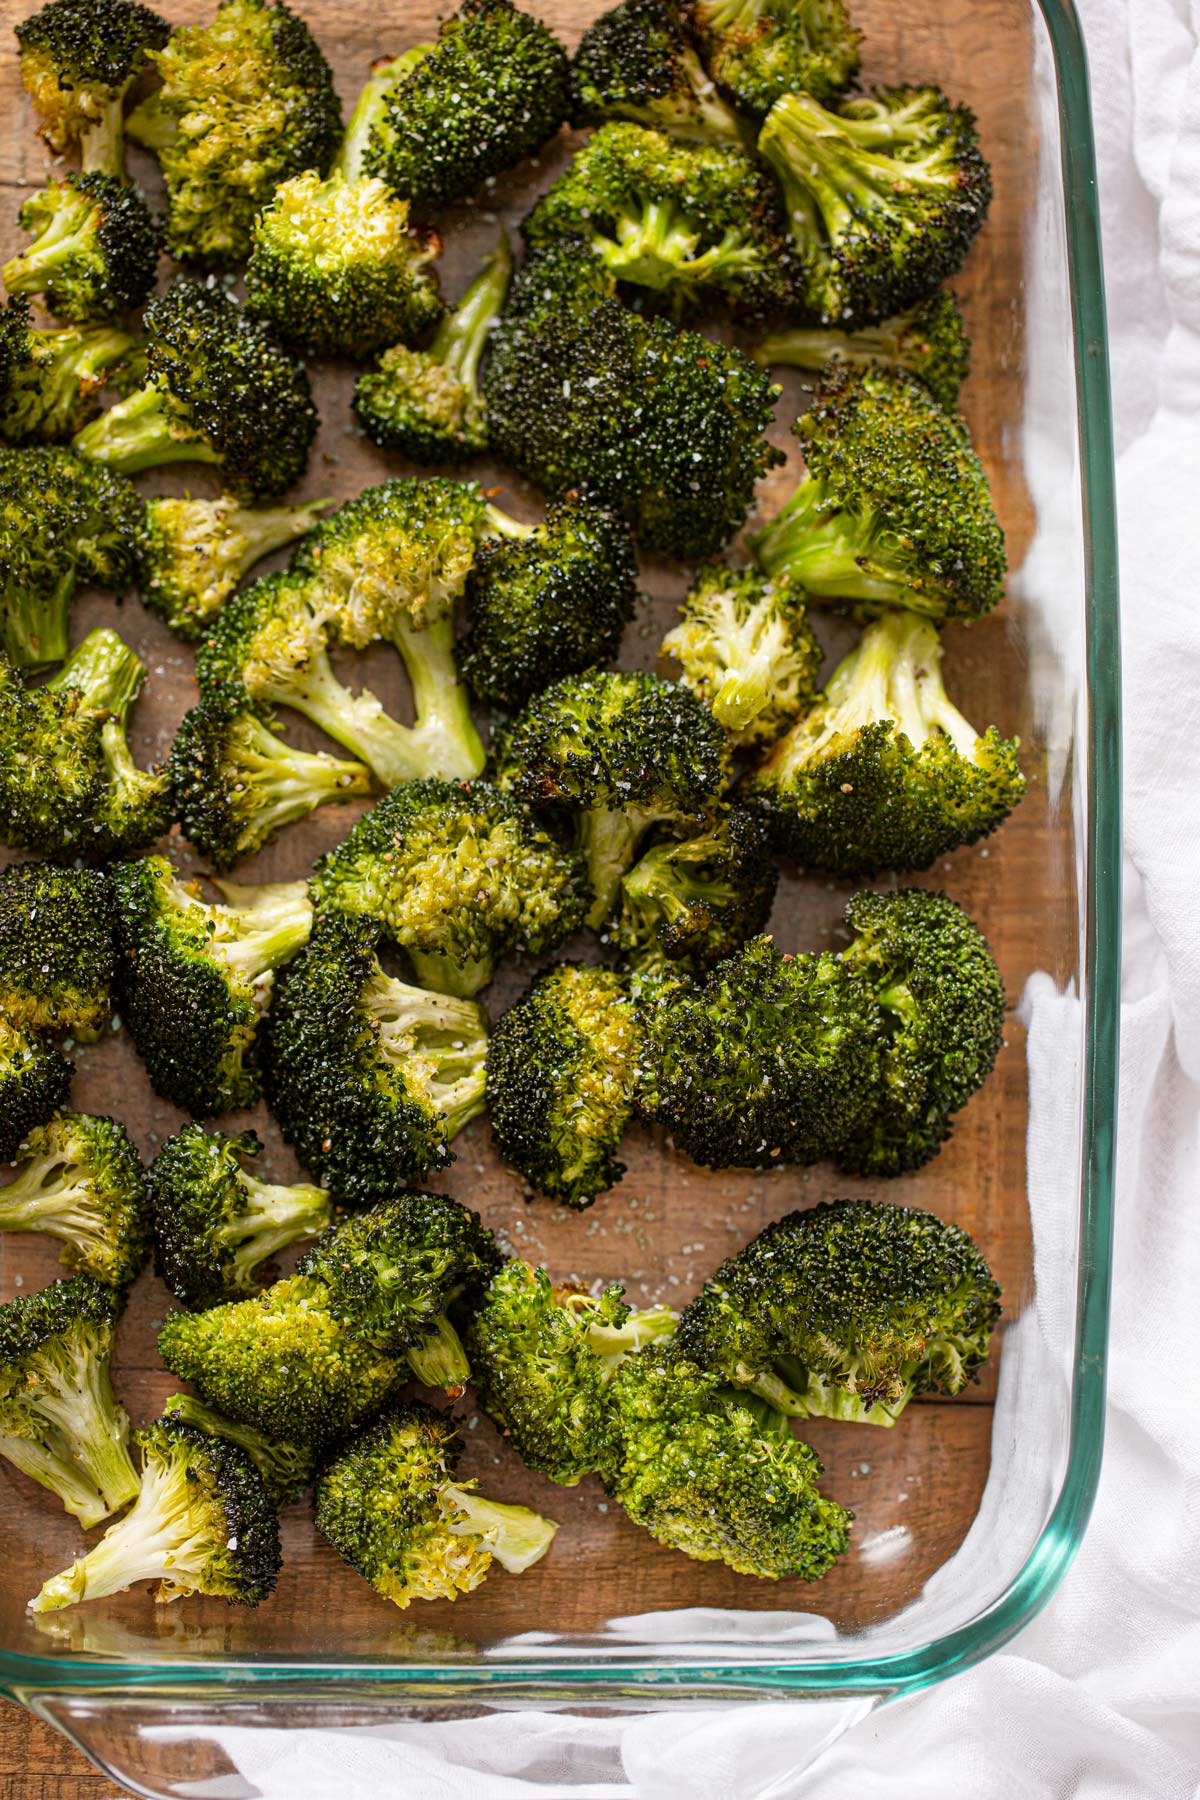 Roasted Broccoli in glass baking dish